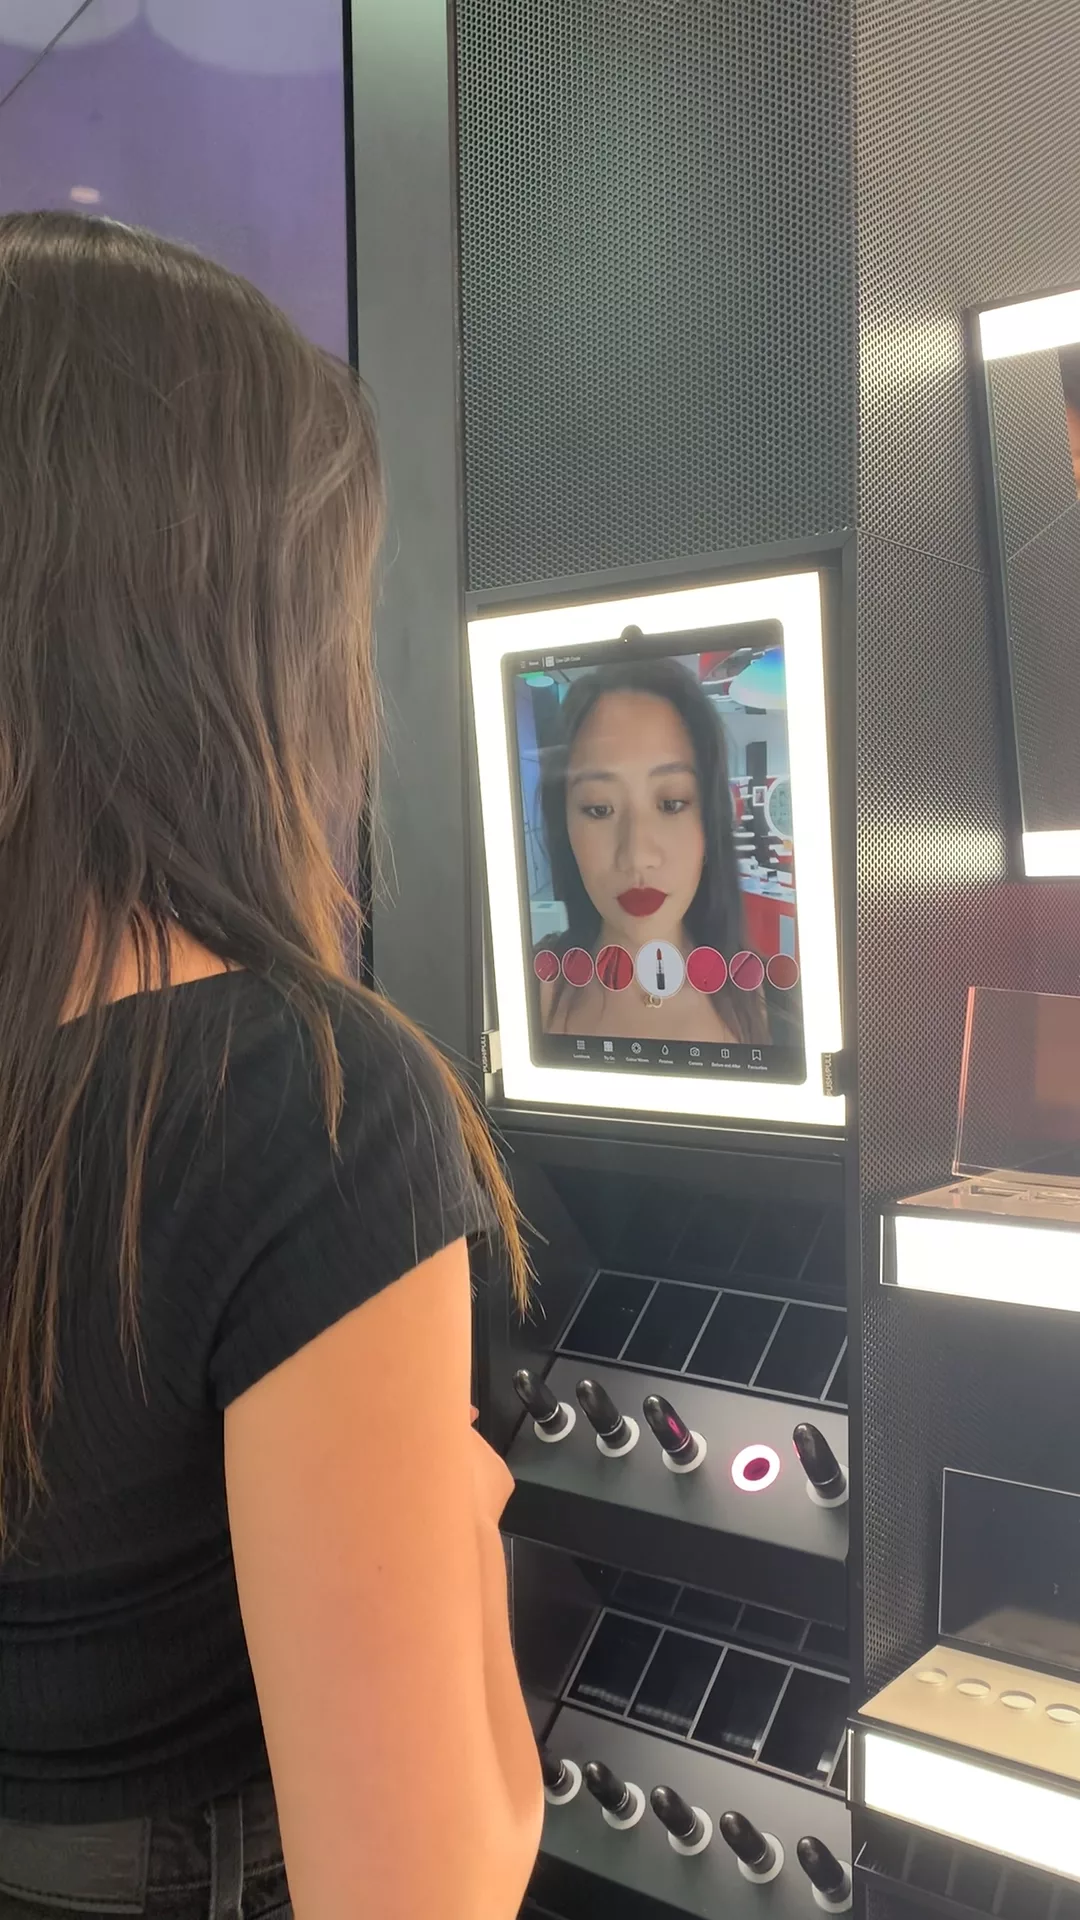 A woman seeing the lipstick that she picked up off a lipstick stand being rendered on her face as an augmented reality effect on an iPad.